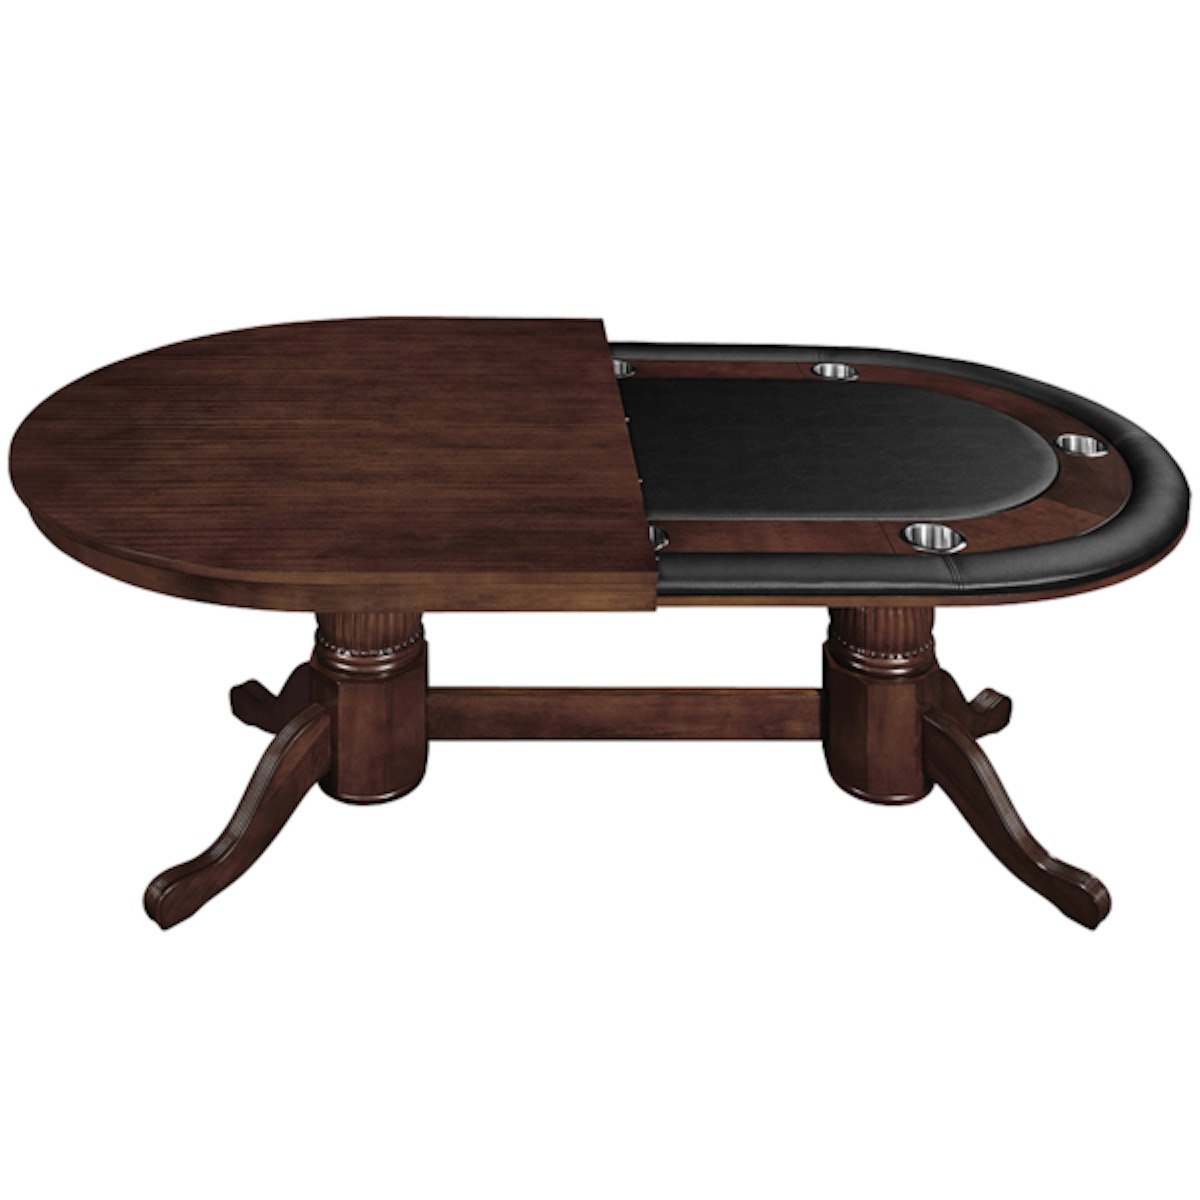 Texas-Hold-Em-Poker-Table-with-Dining-Top-Cappuccino-1-1.jpg